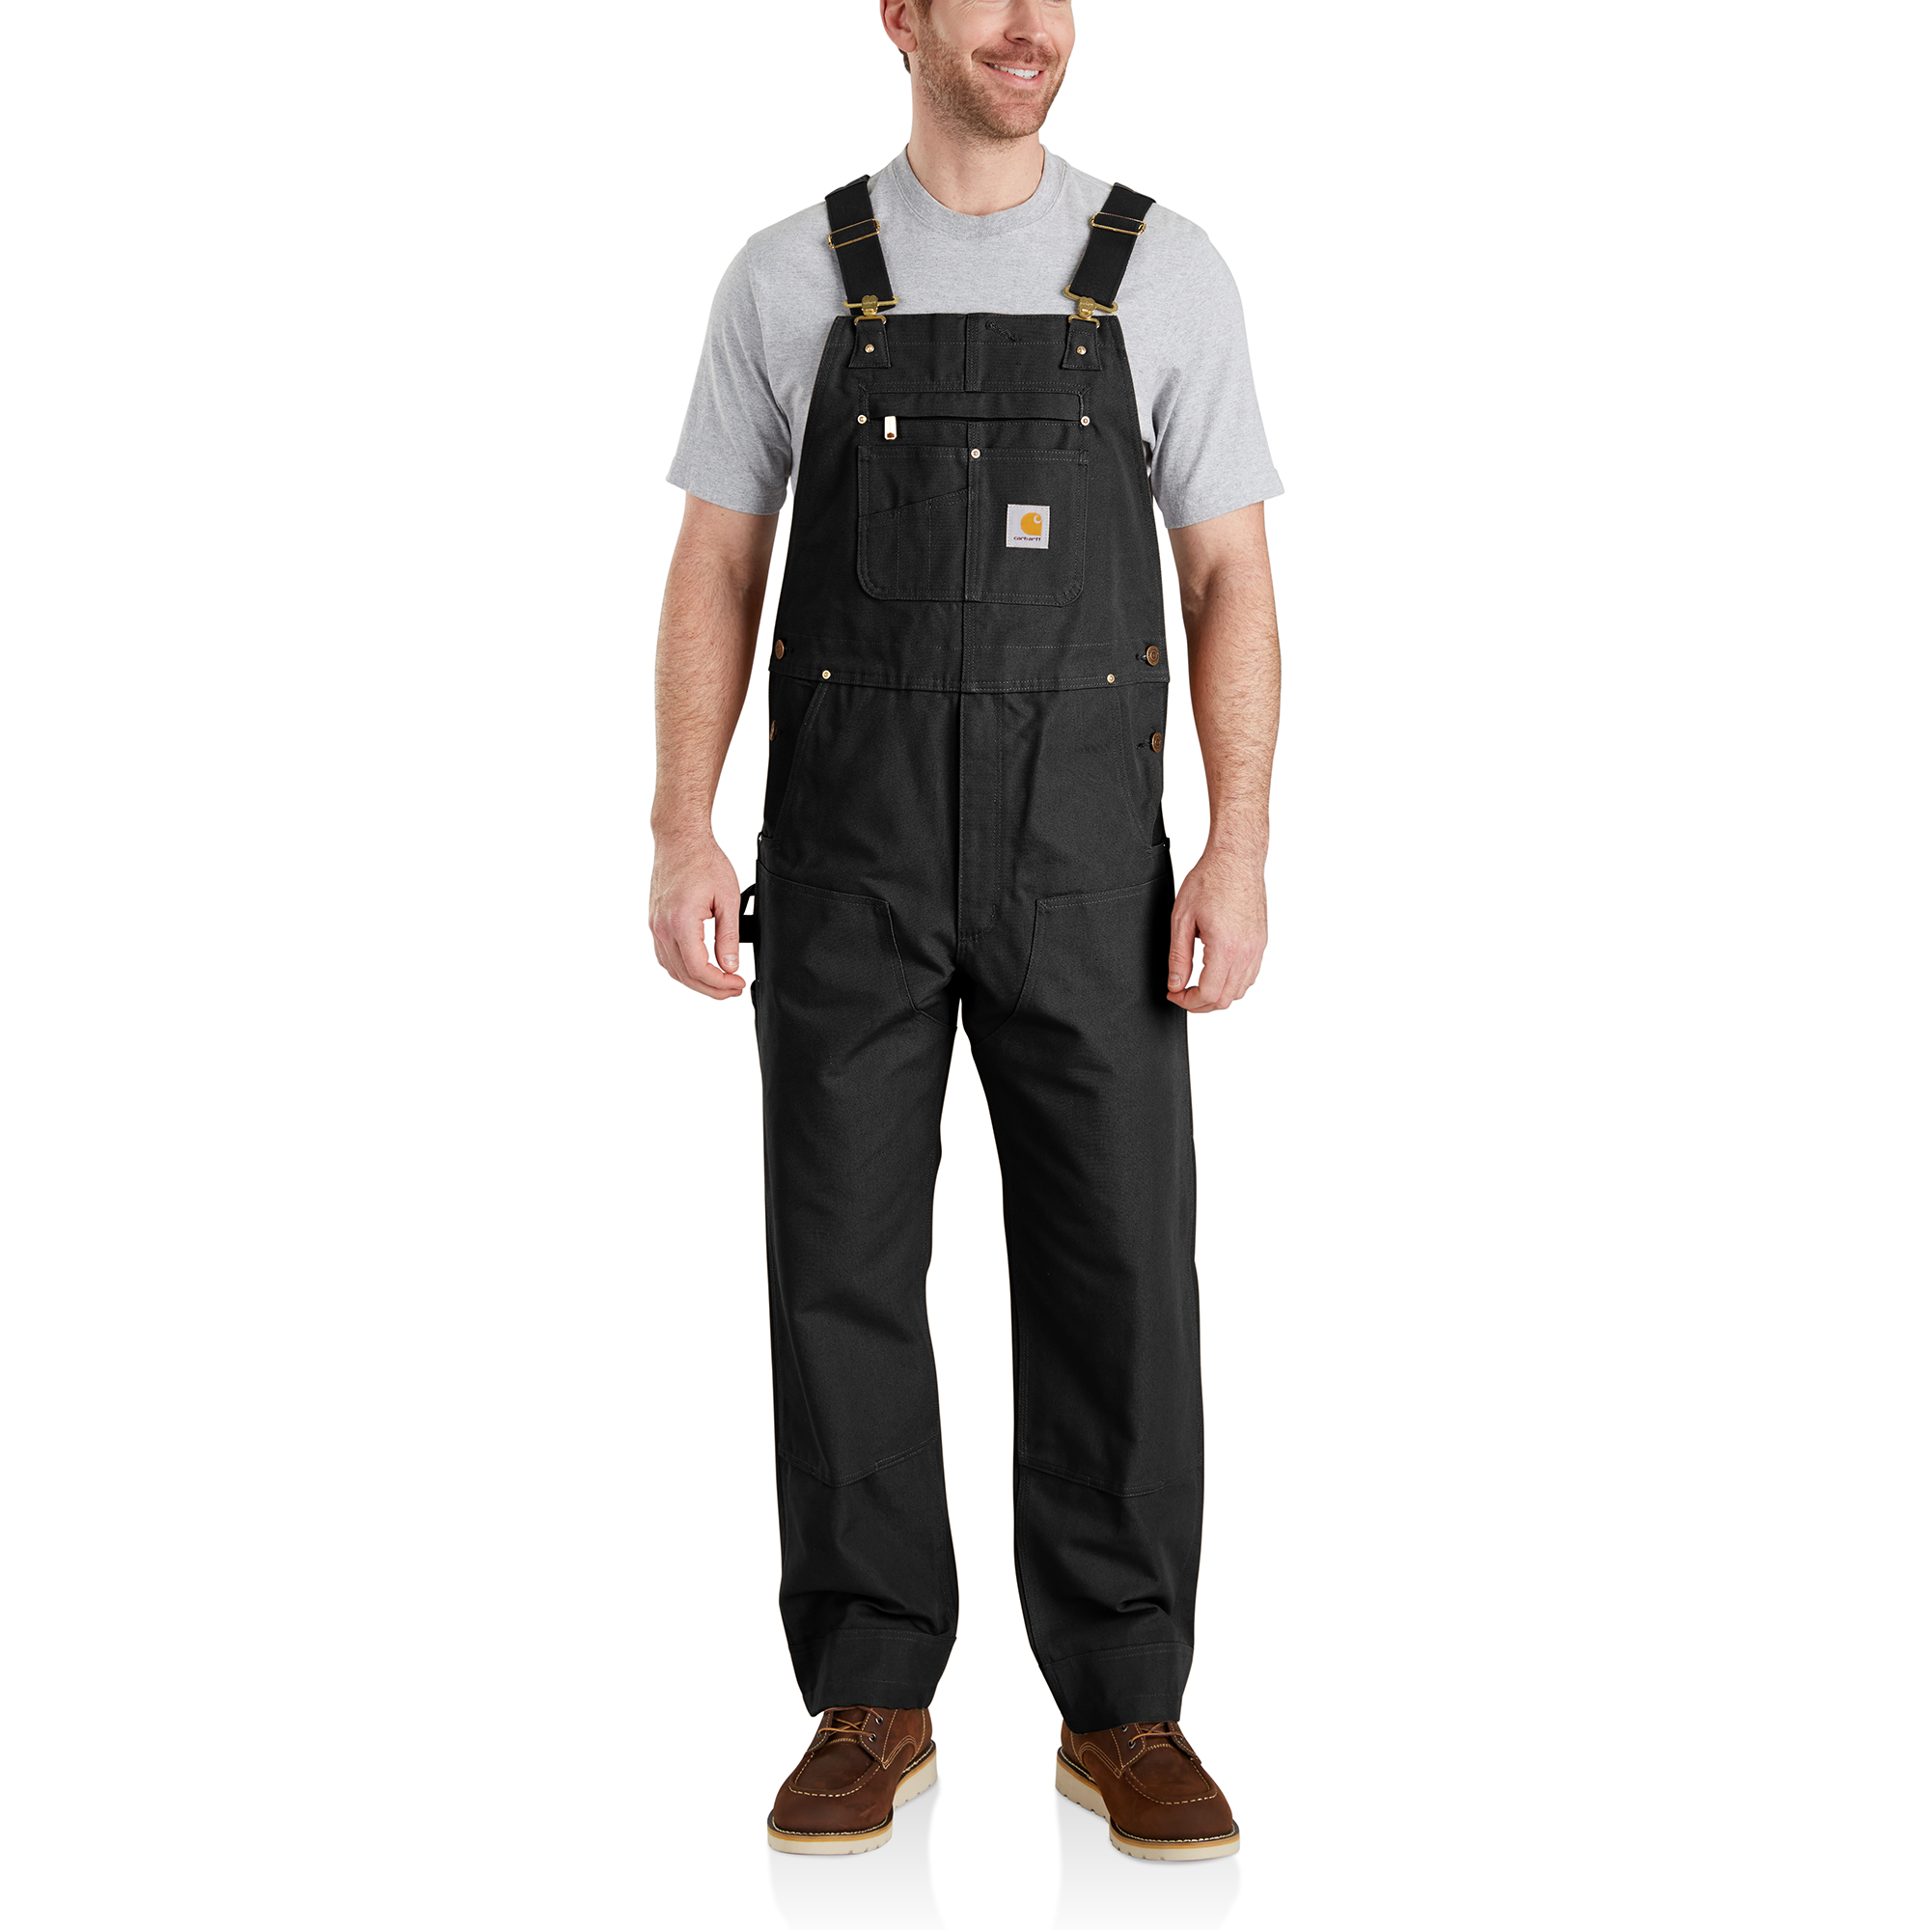 Puddle Jumpers Sheep Cotton Drill Apron